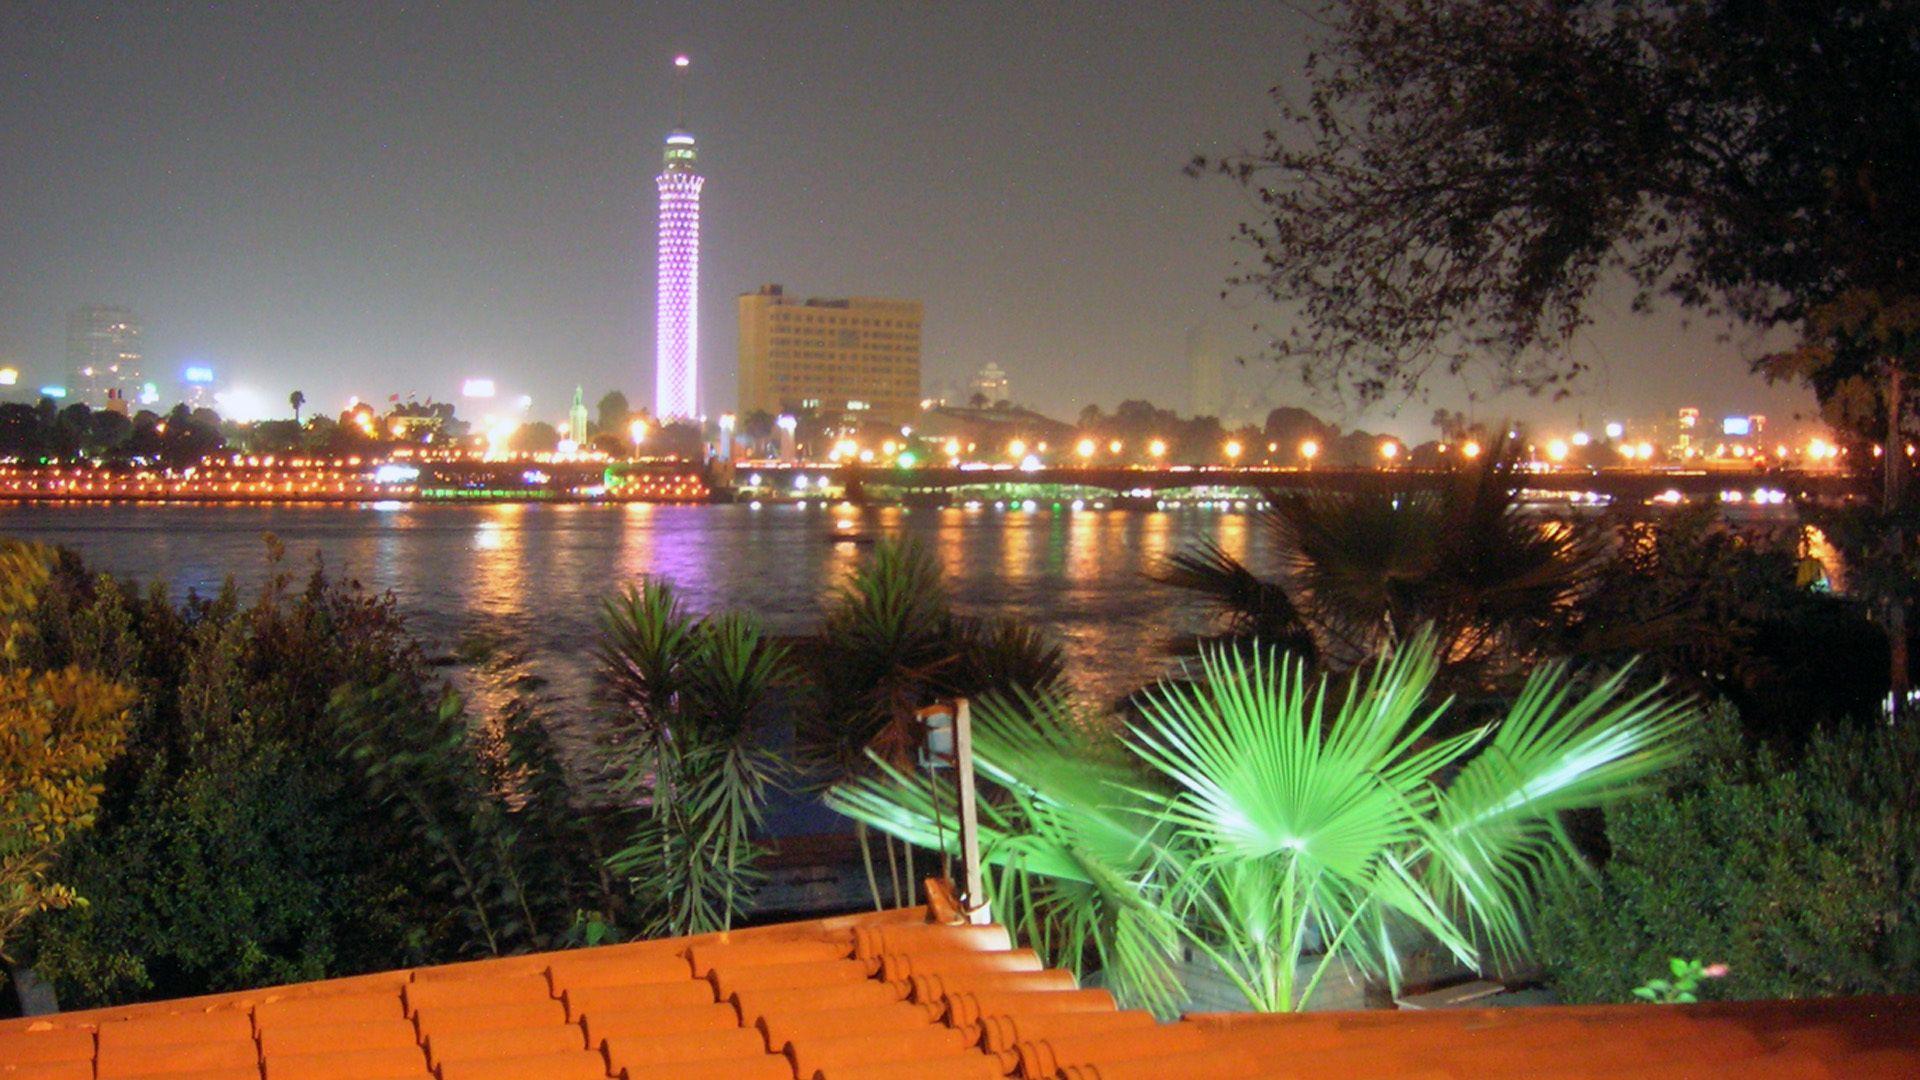 The Nile River in Cairo wallpaper and image, picture